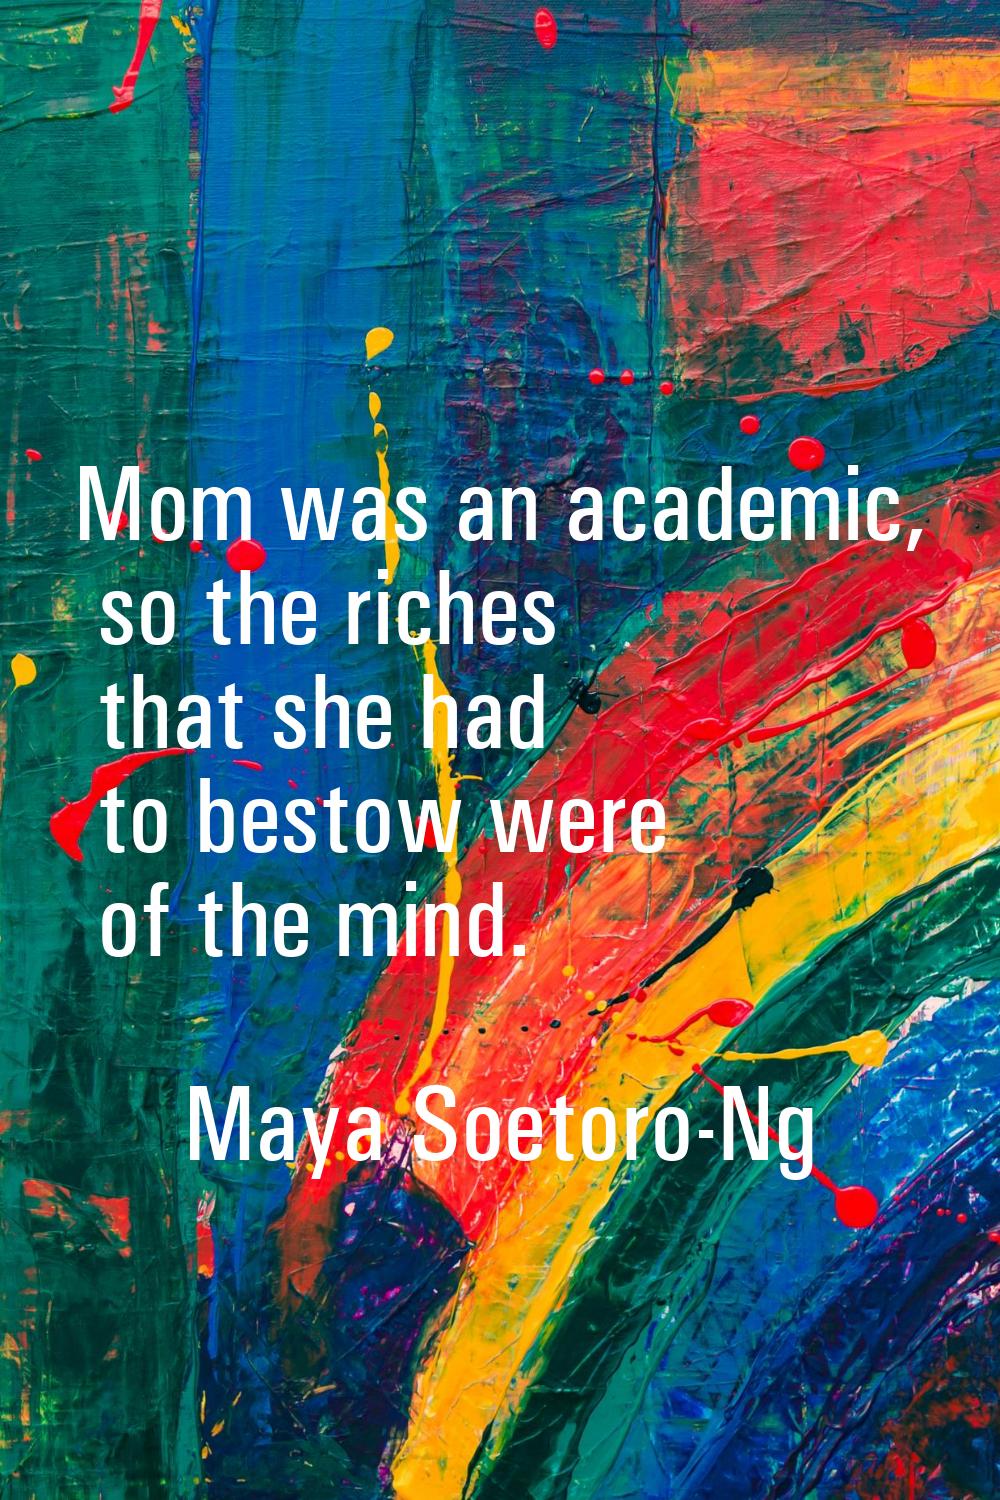 Mom was an academic, so the riches that she had to bestow were of the mind.